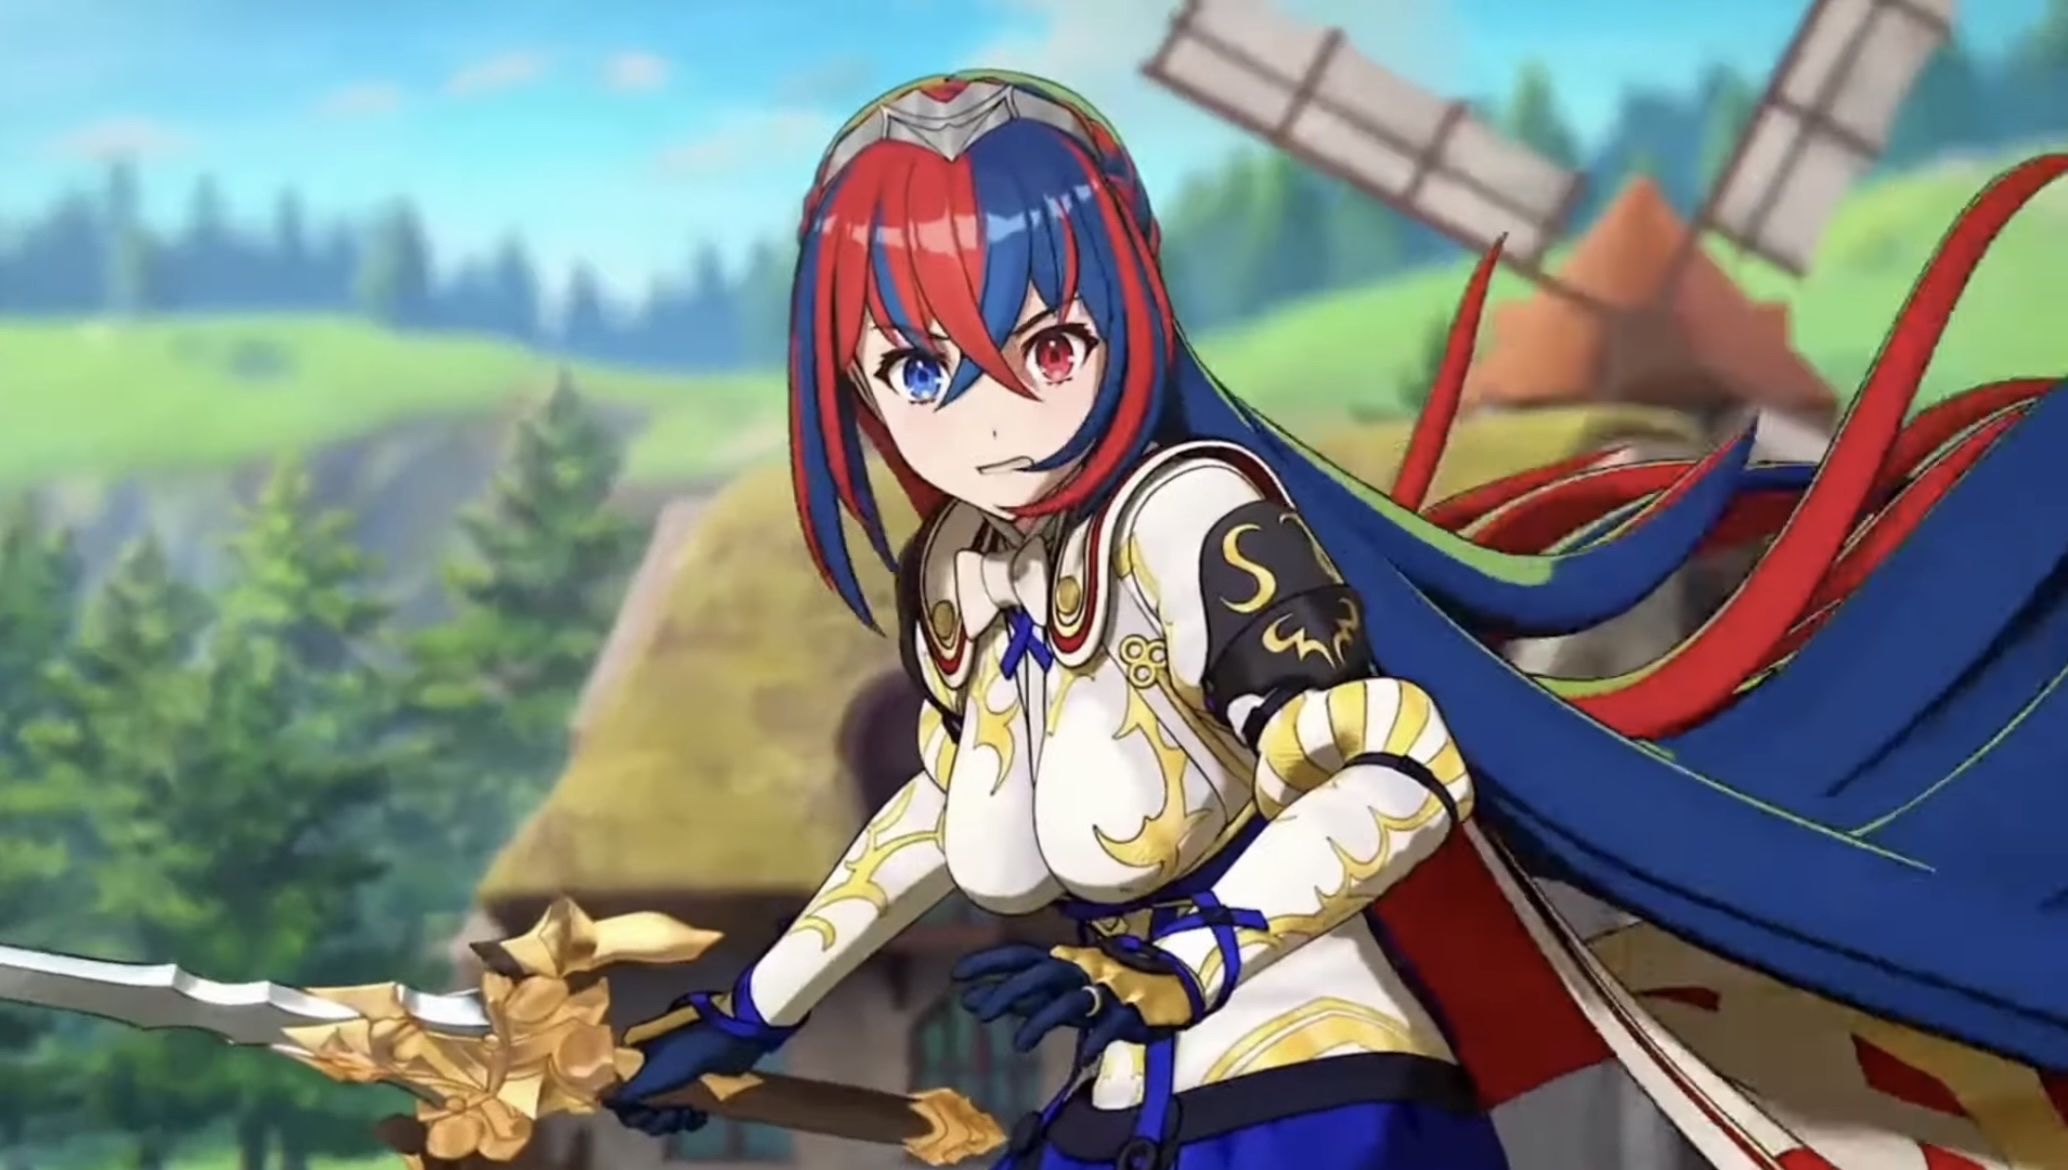 The female protagonist of Fire Emblem Engage is talked about as a mess wwwwwwwww 2